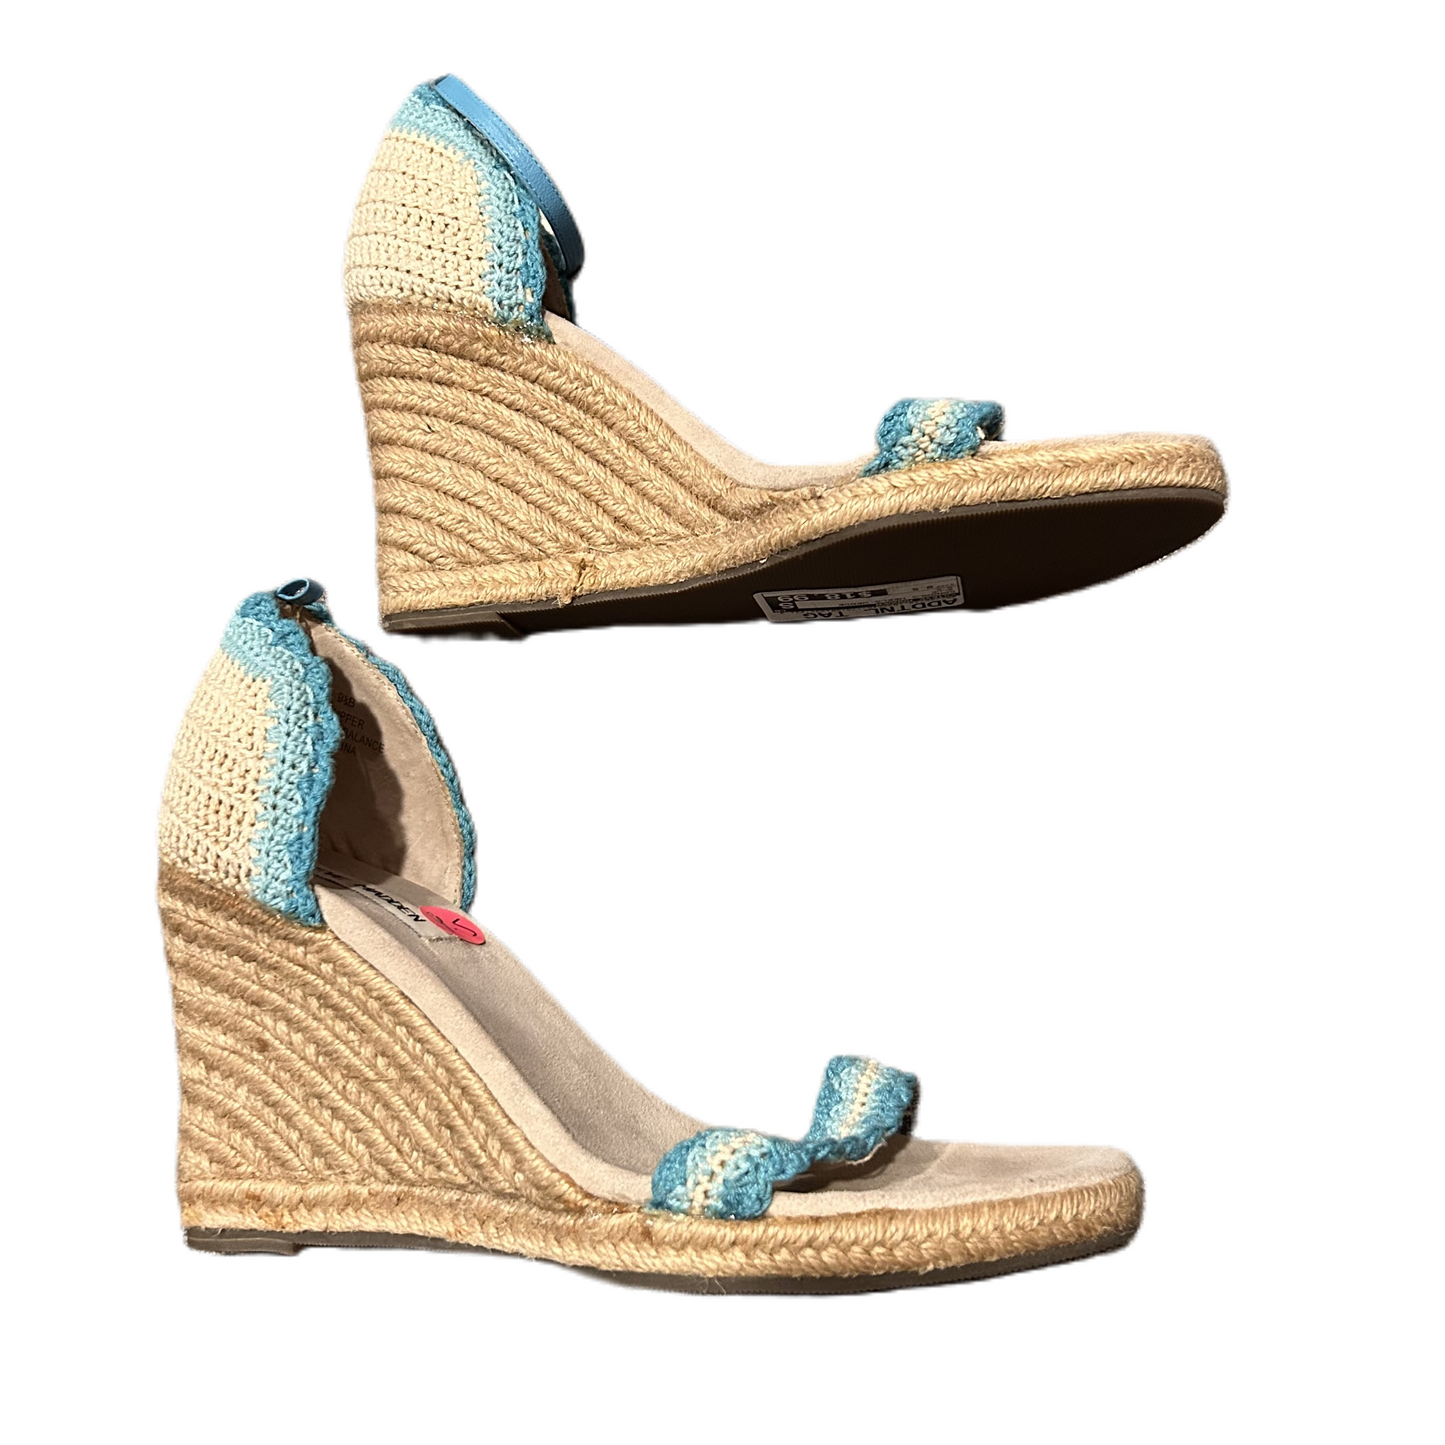 Sandals Heels Wedge By Steve Madden  Size: 9.5